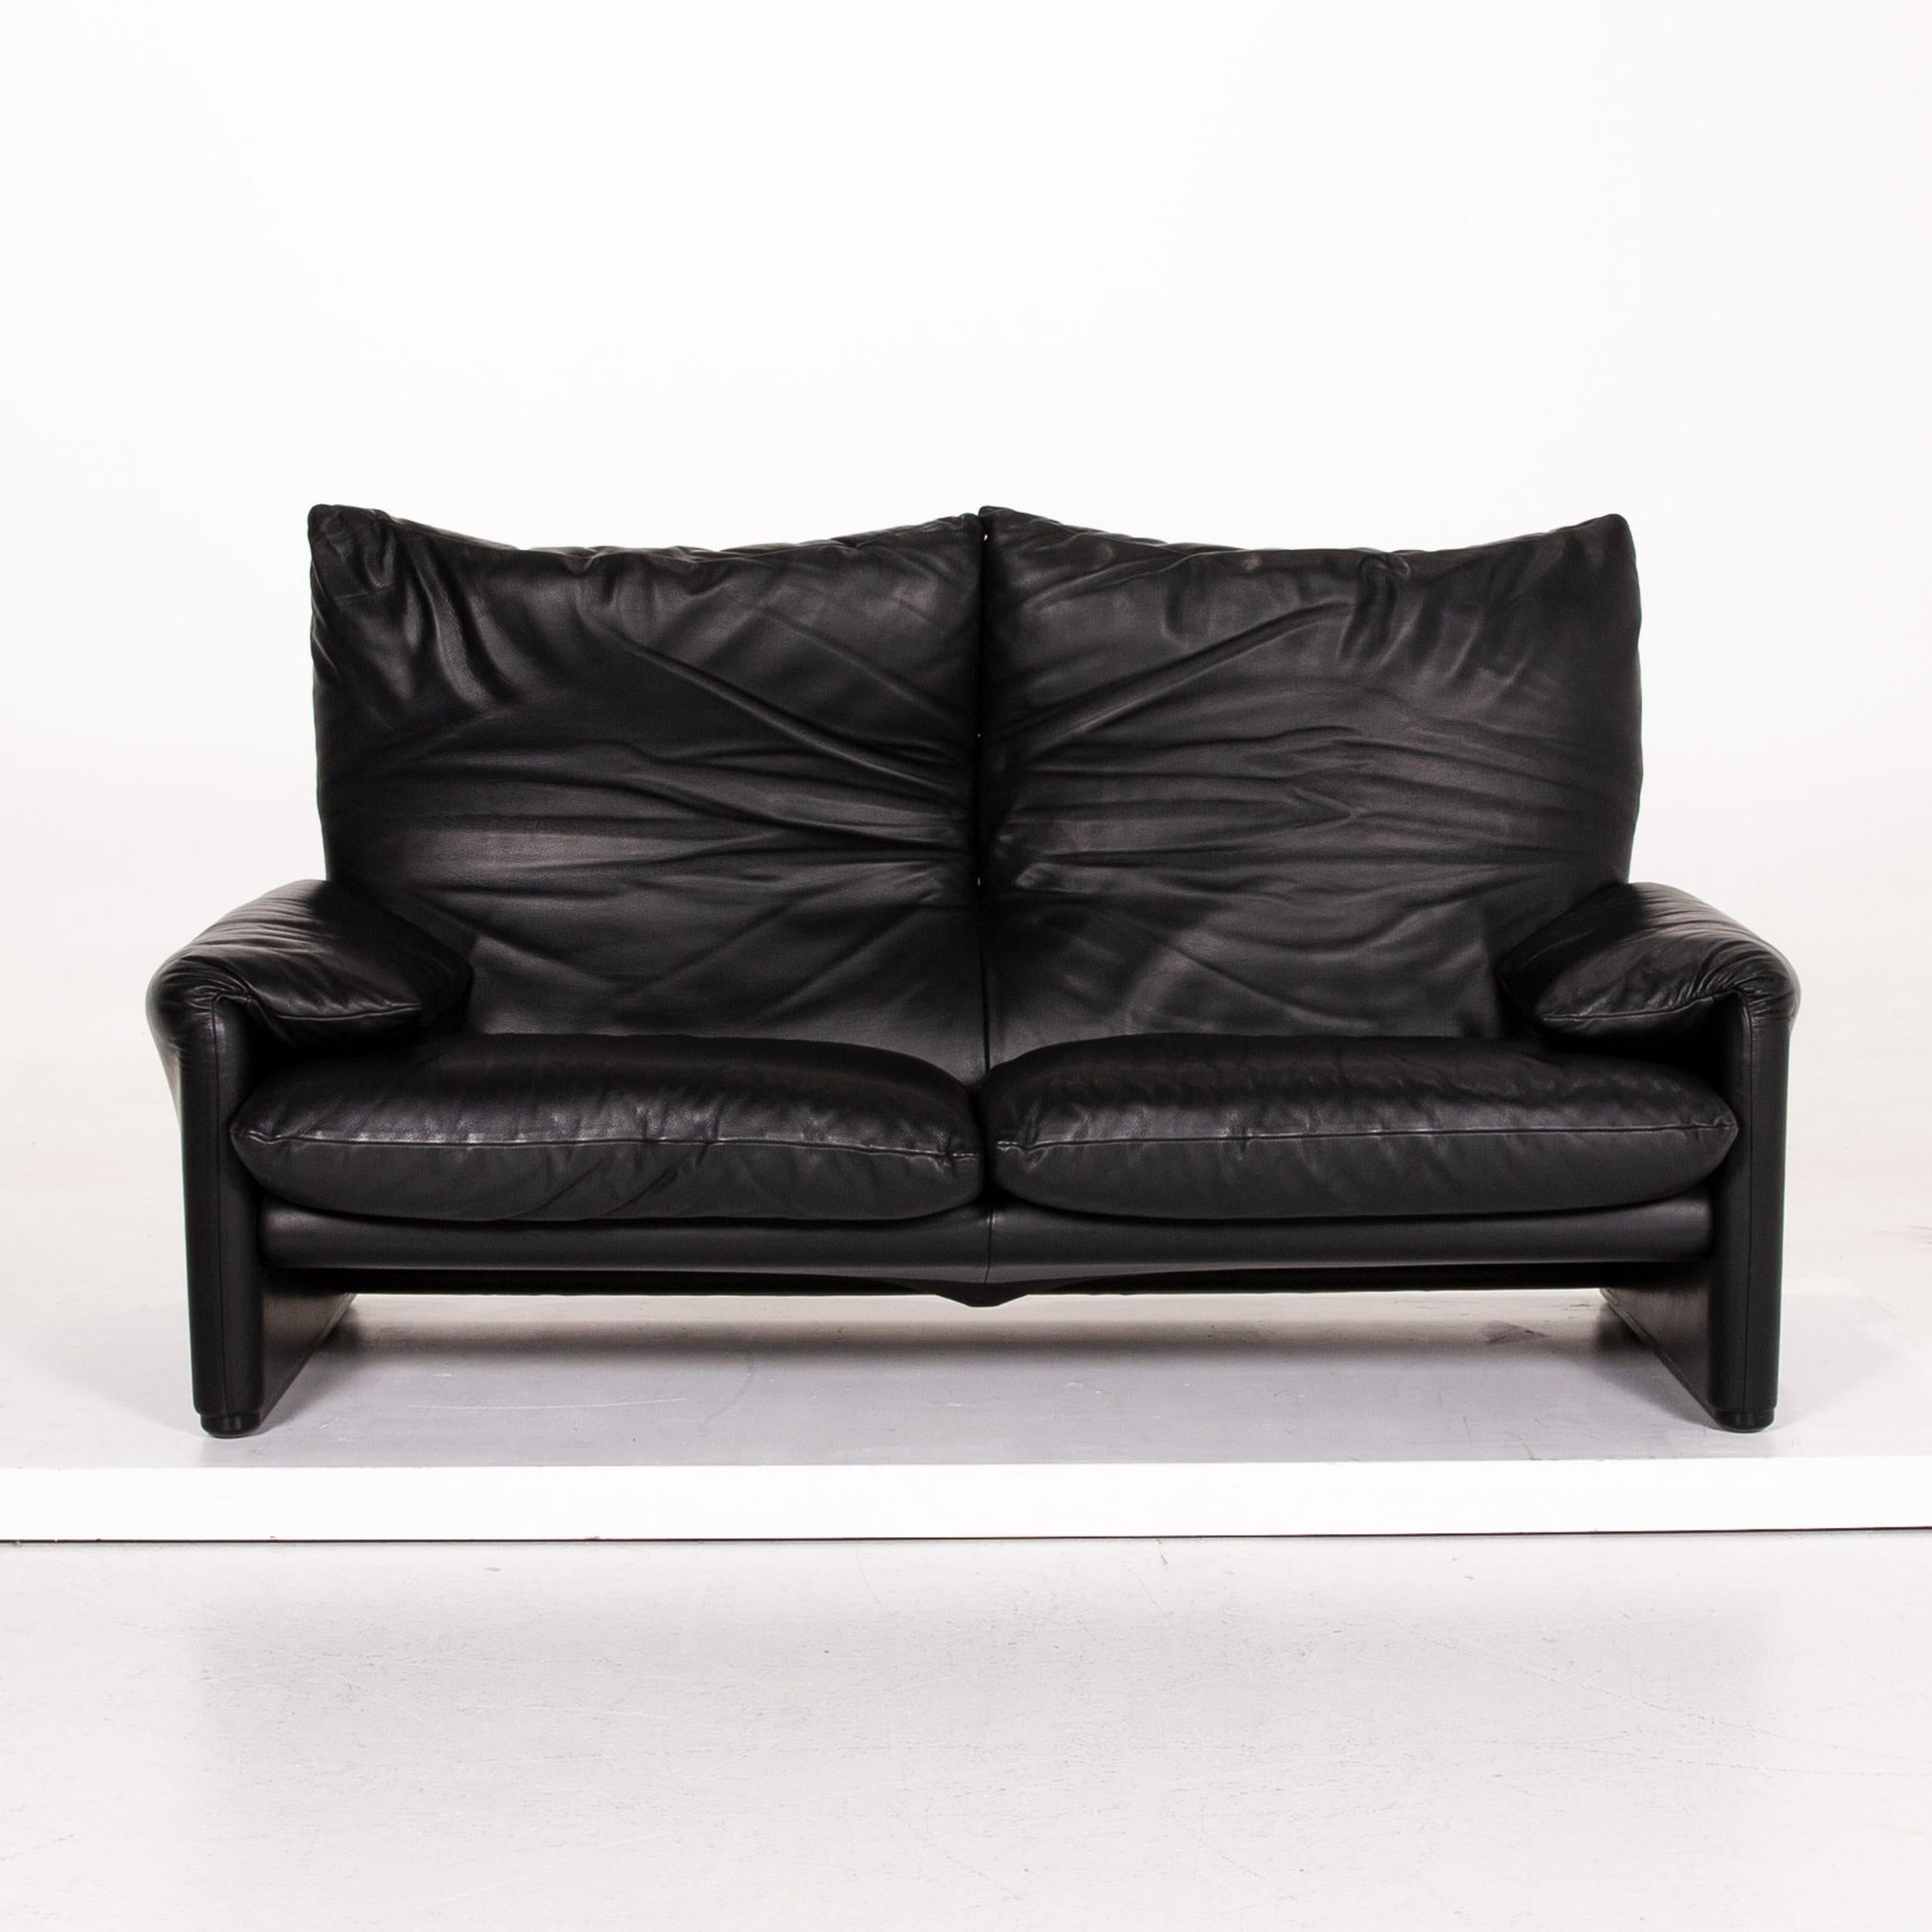 Modern Cassina Maralunga Leather Sofa Black Three-Seat Function Couch